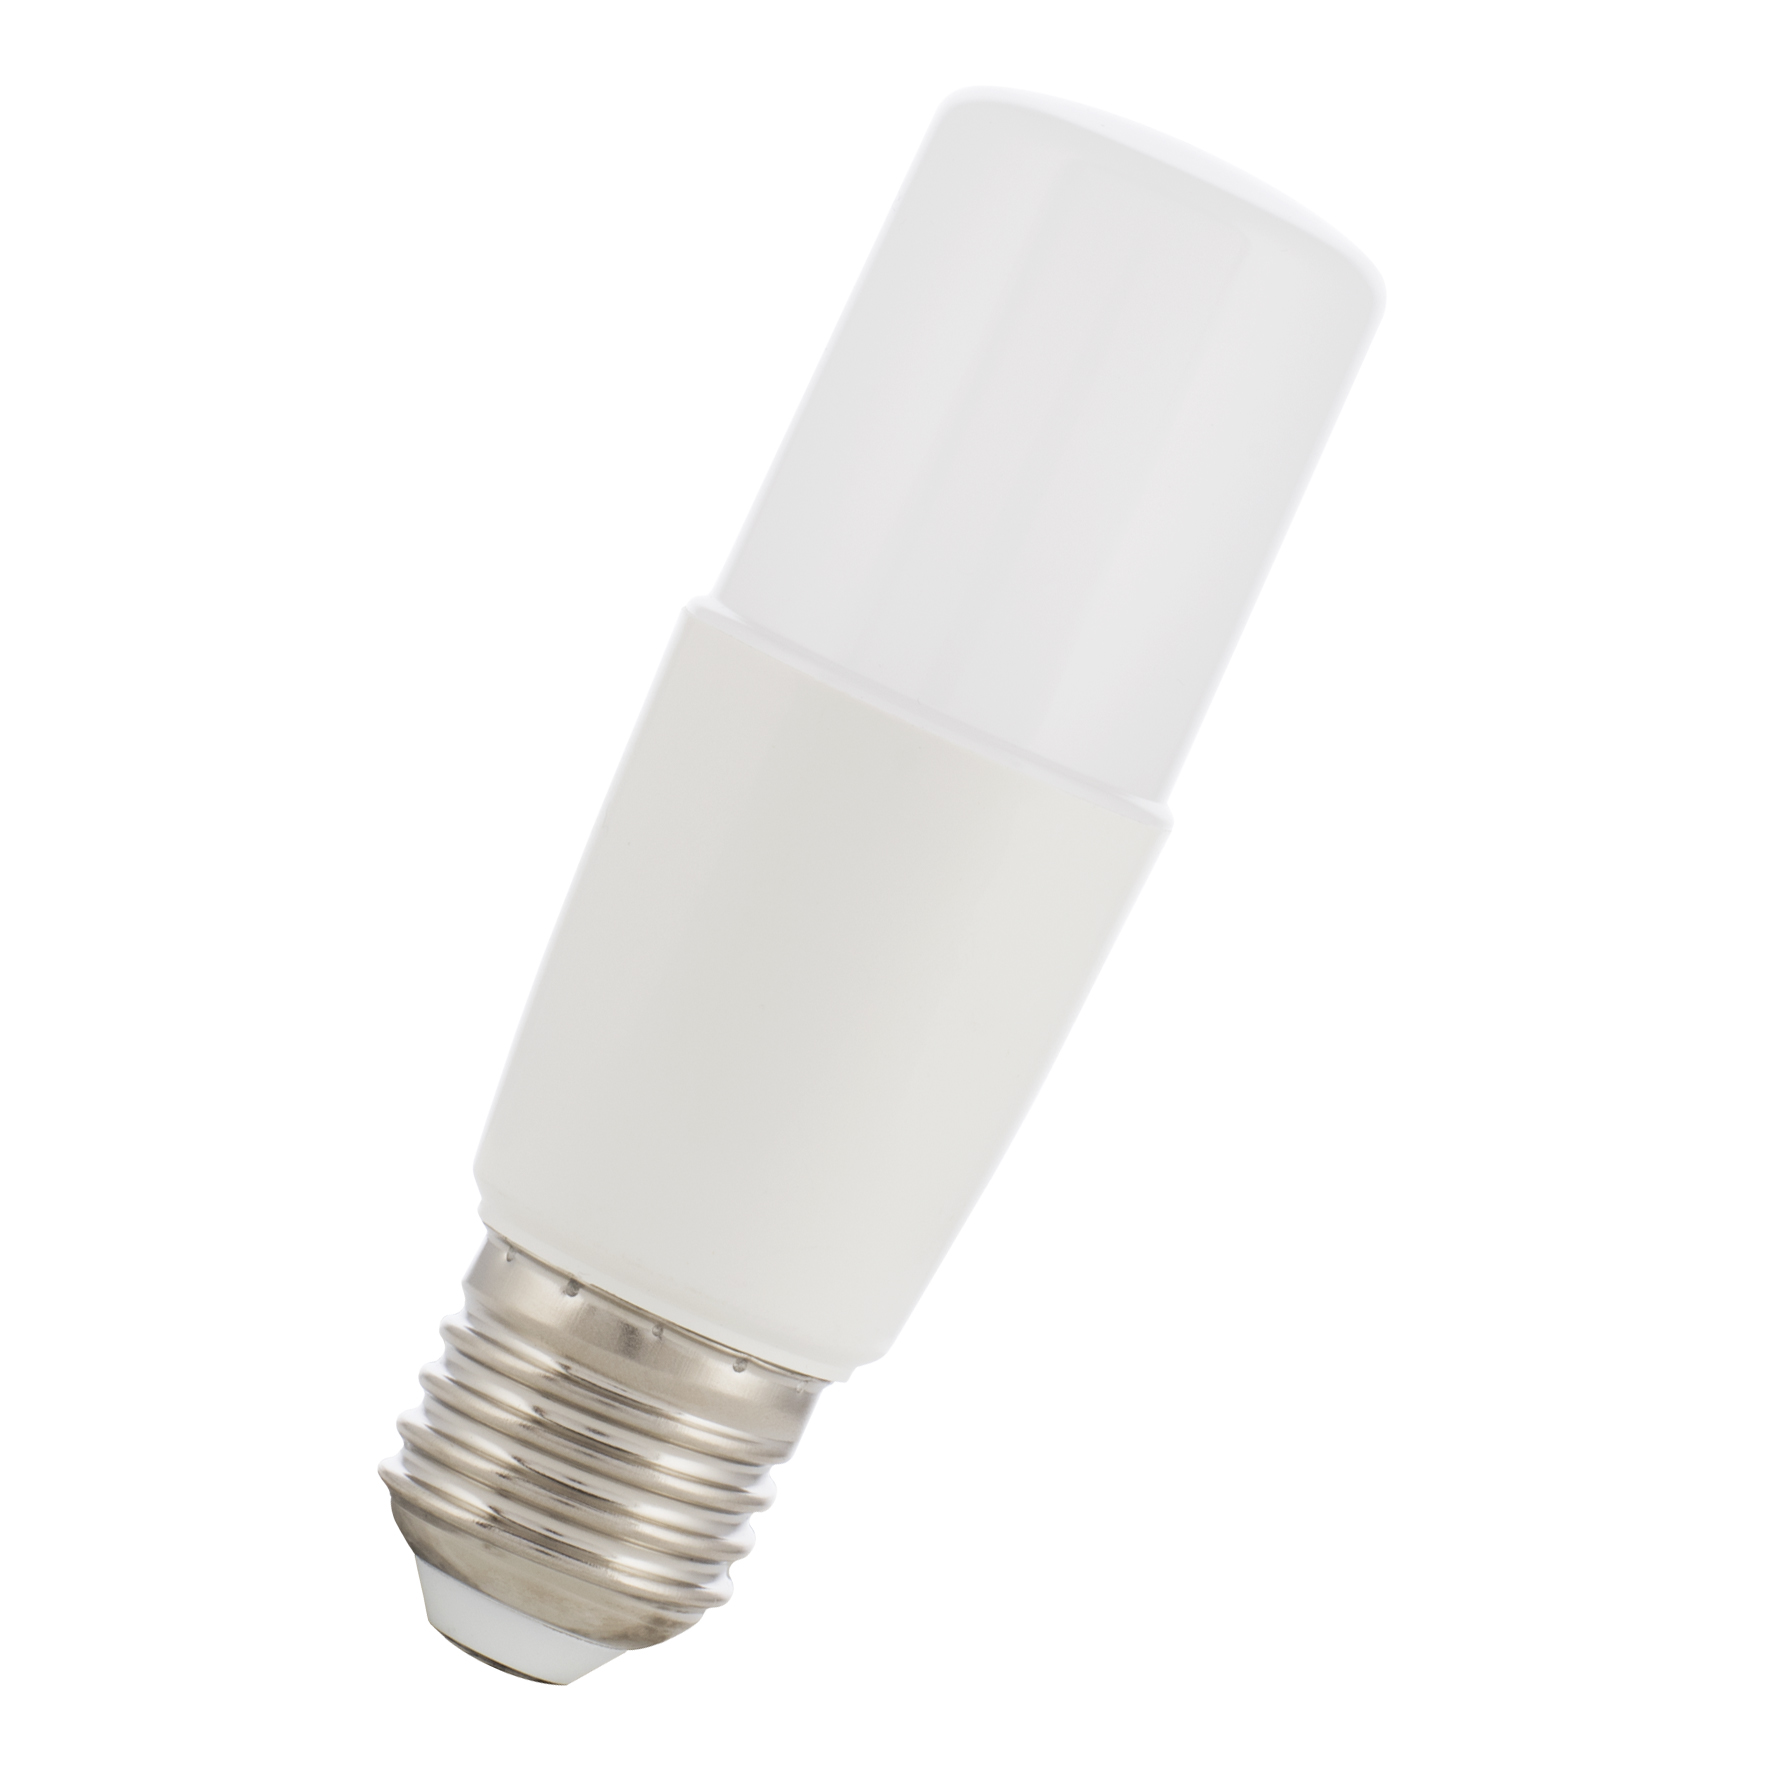 LED Ecobasic Compact T37 E27 7W (50W) 620lm 830